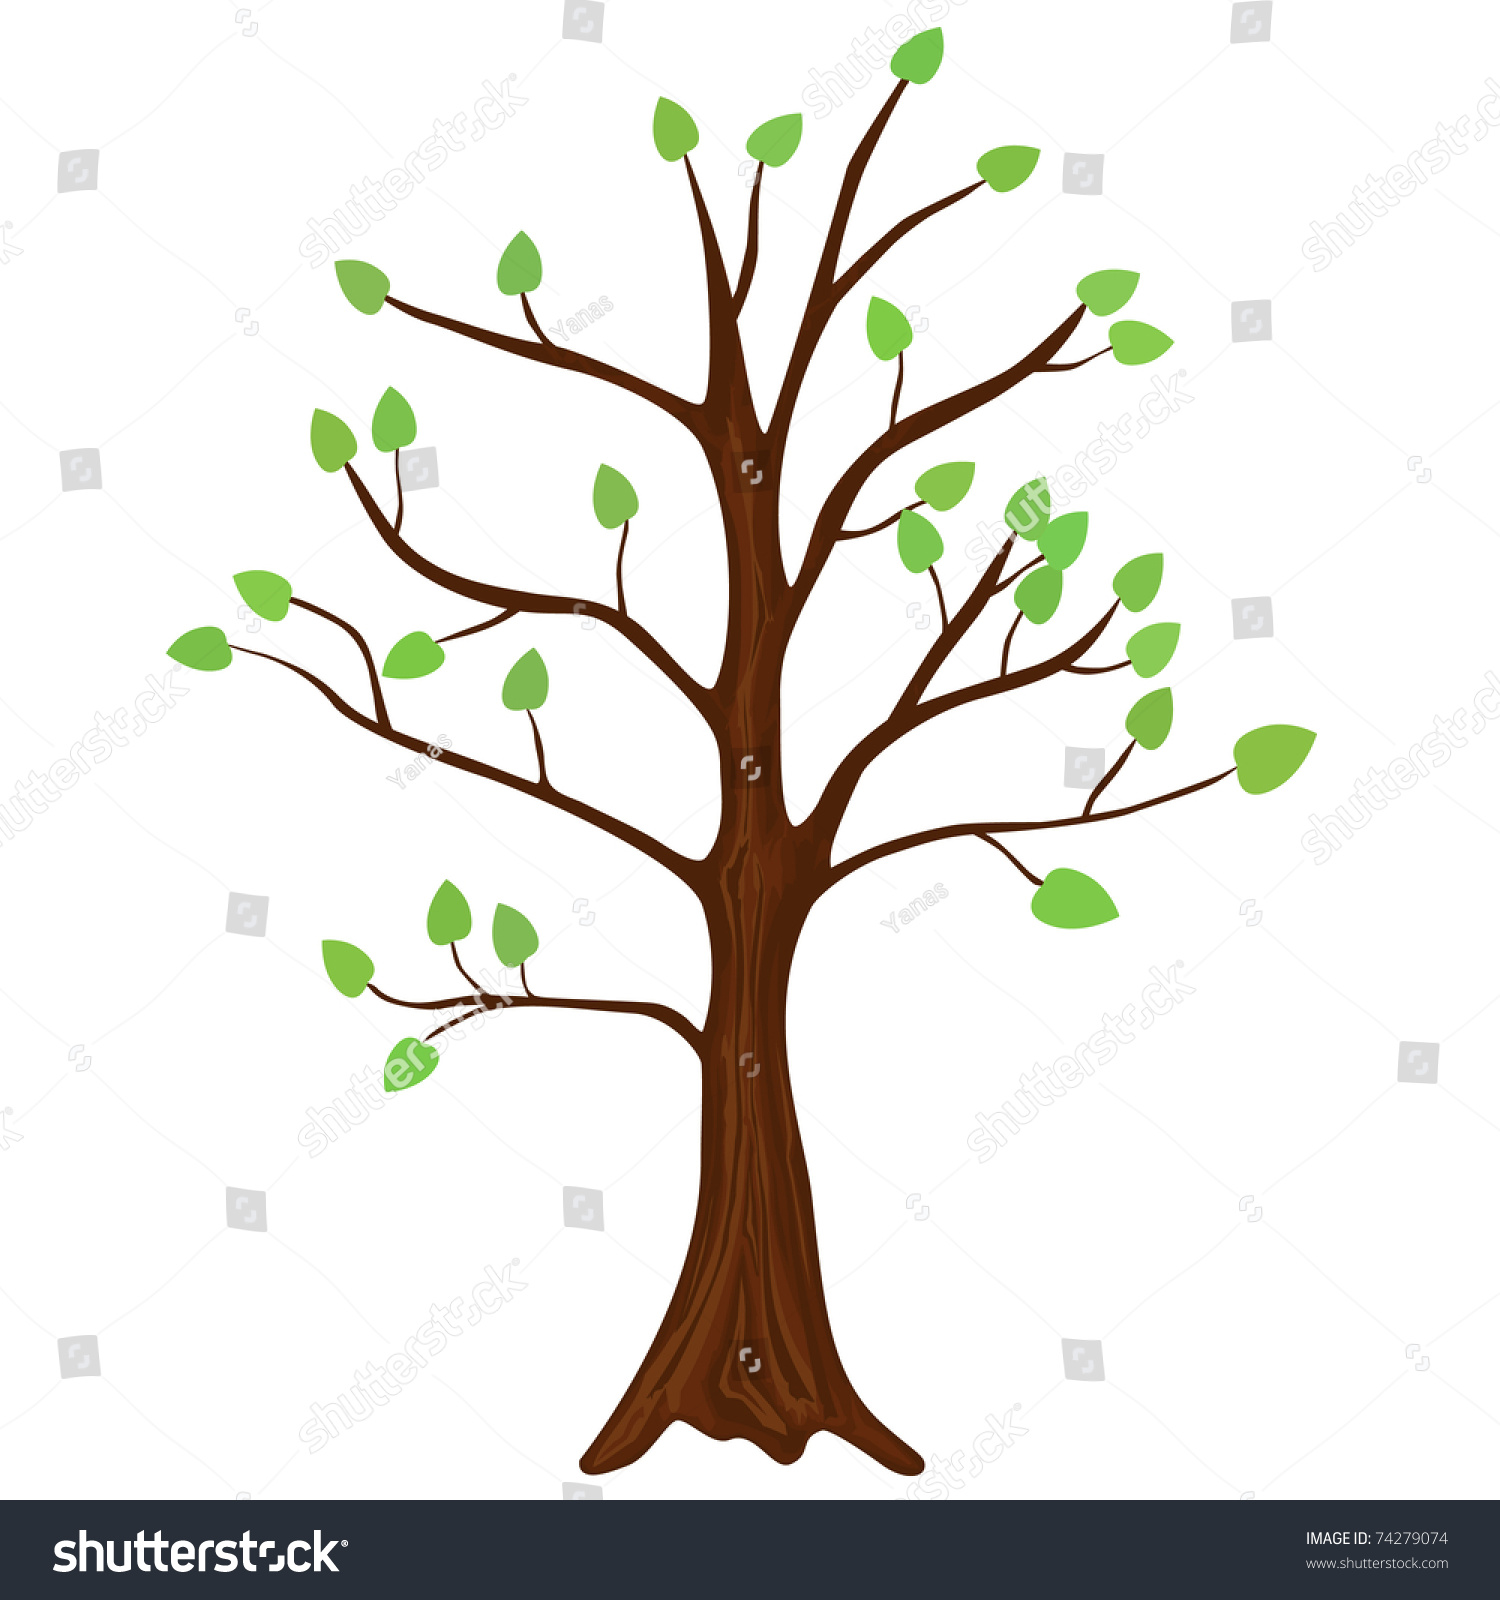 Tree Green Leafage Vector Stock Vector (Royalty Free) 74279074